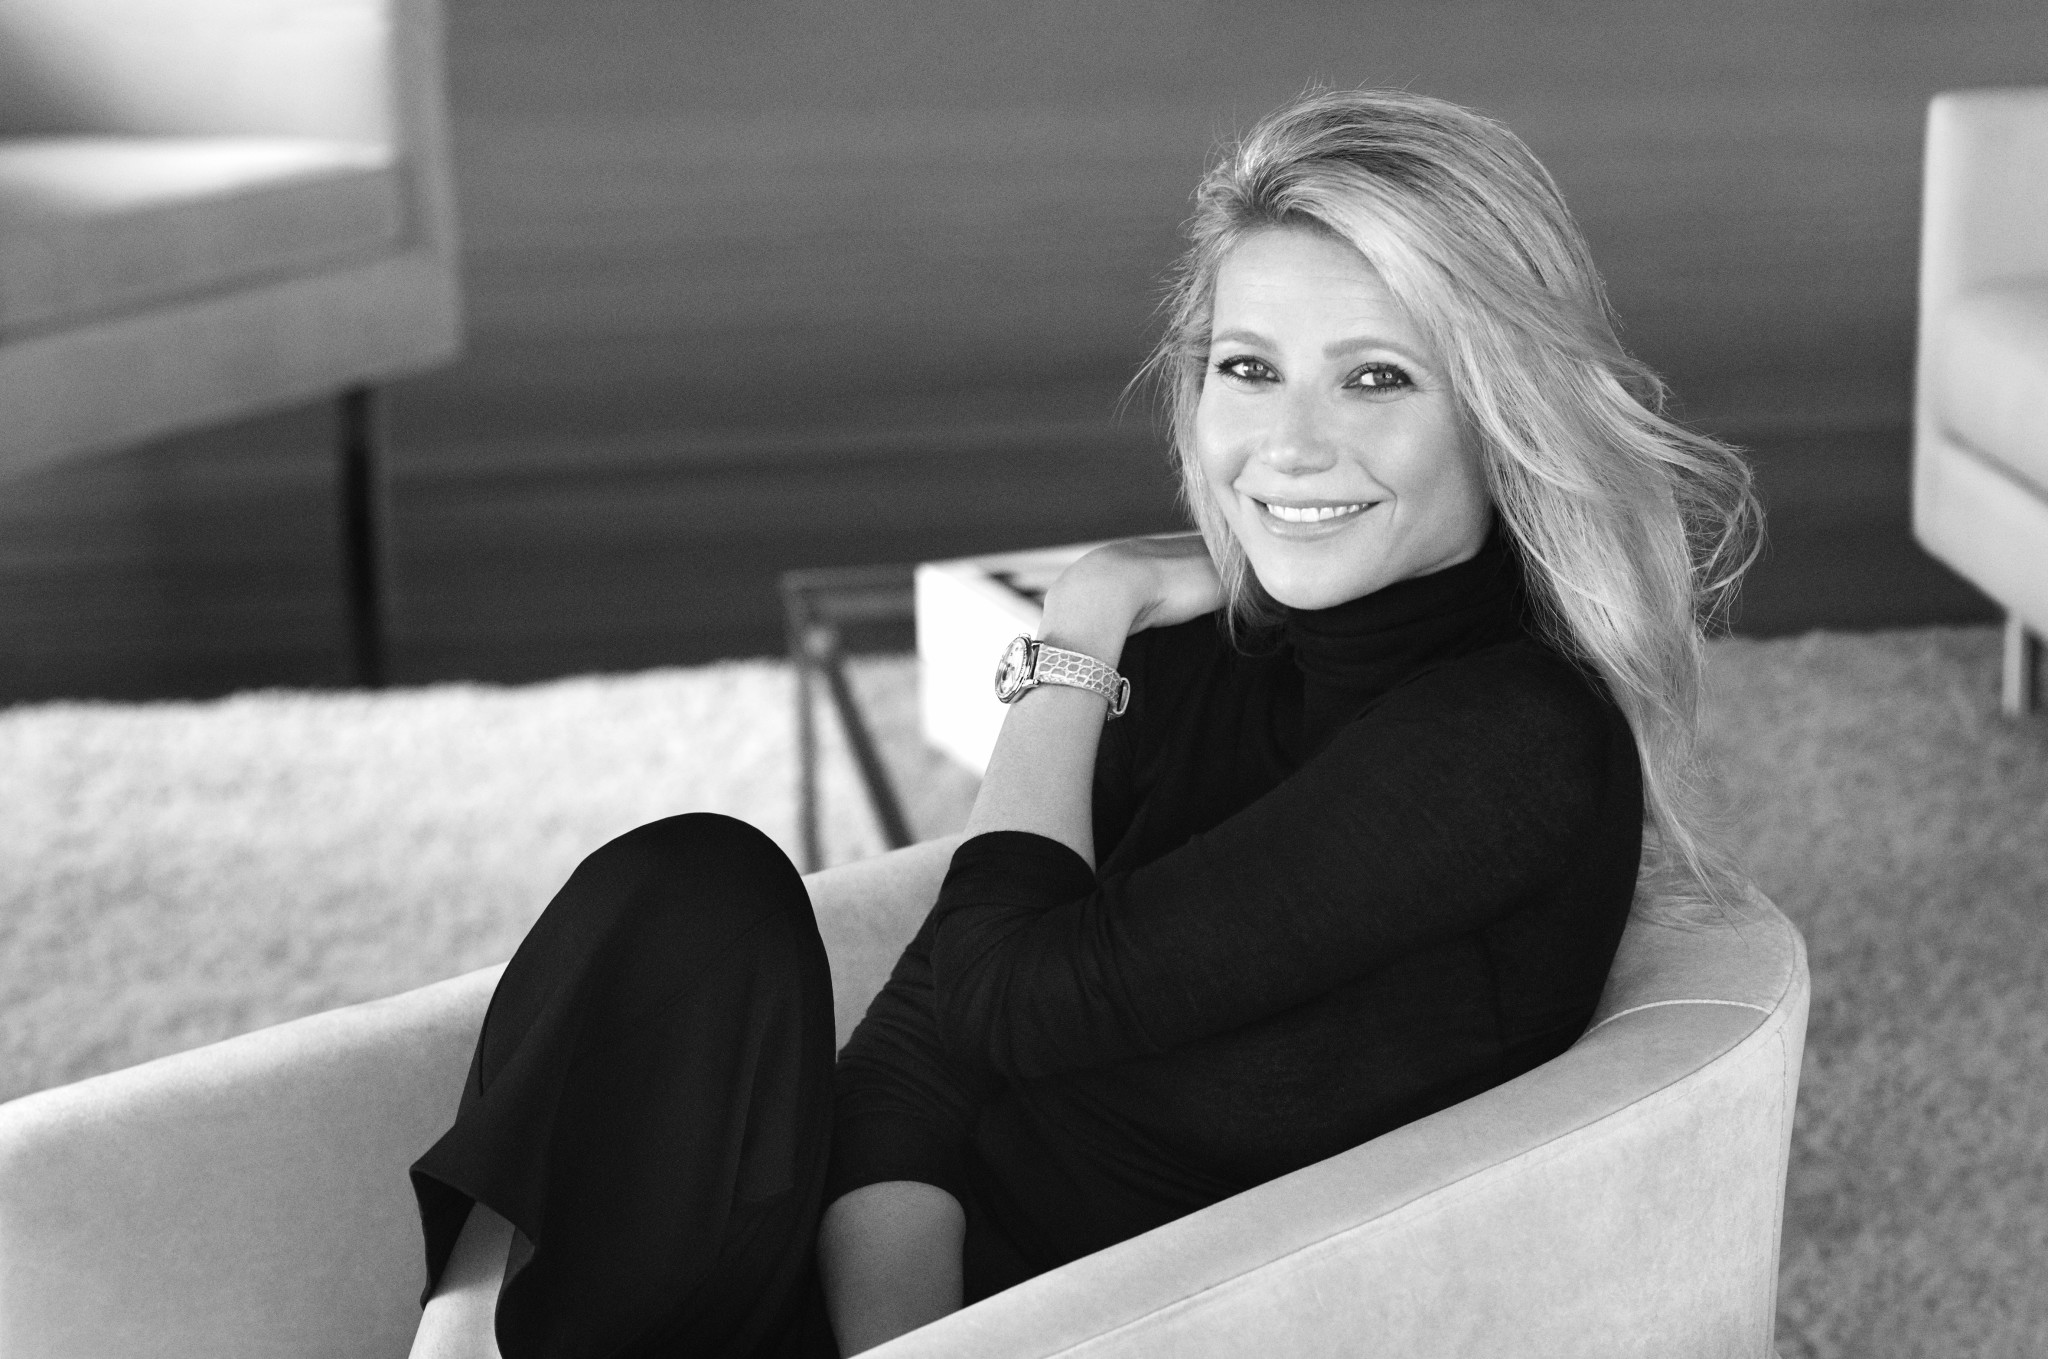 Frederique constant advertising image new ambassador gwyneth paltrow